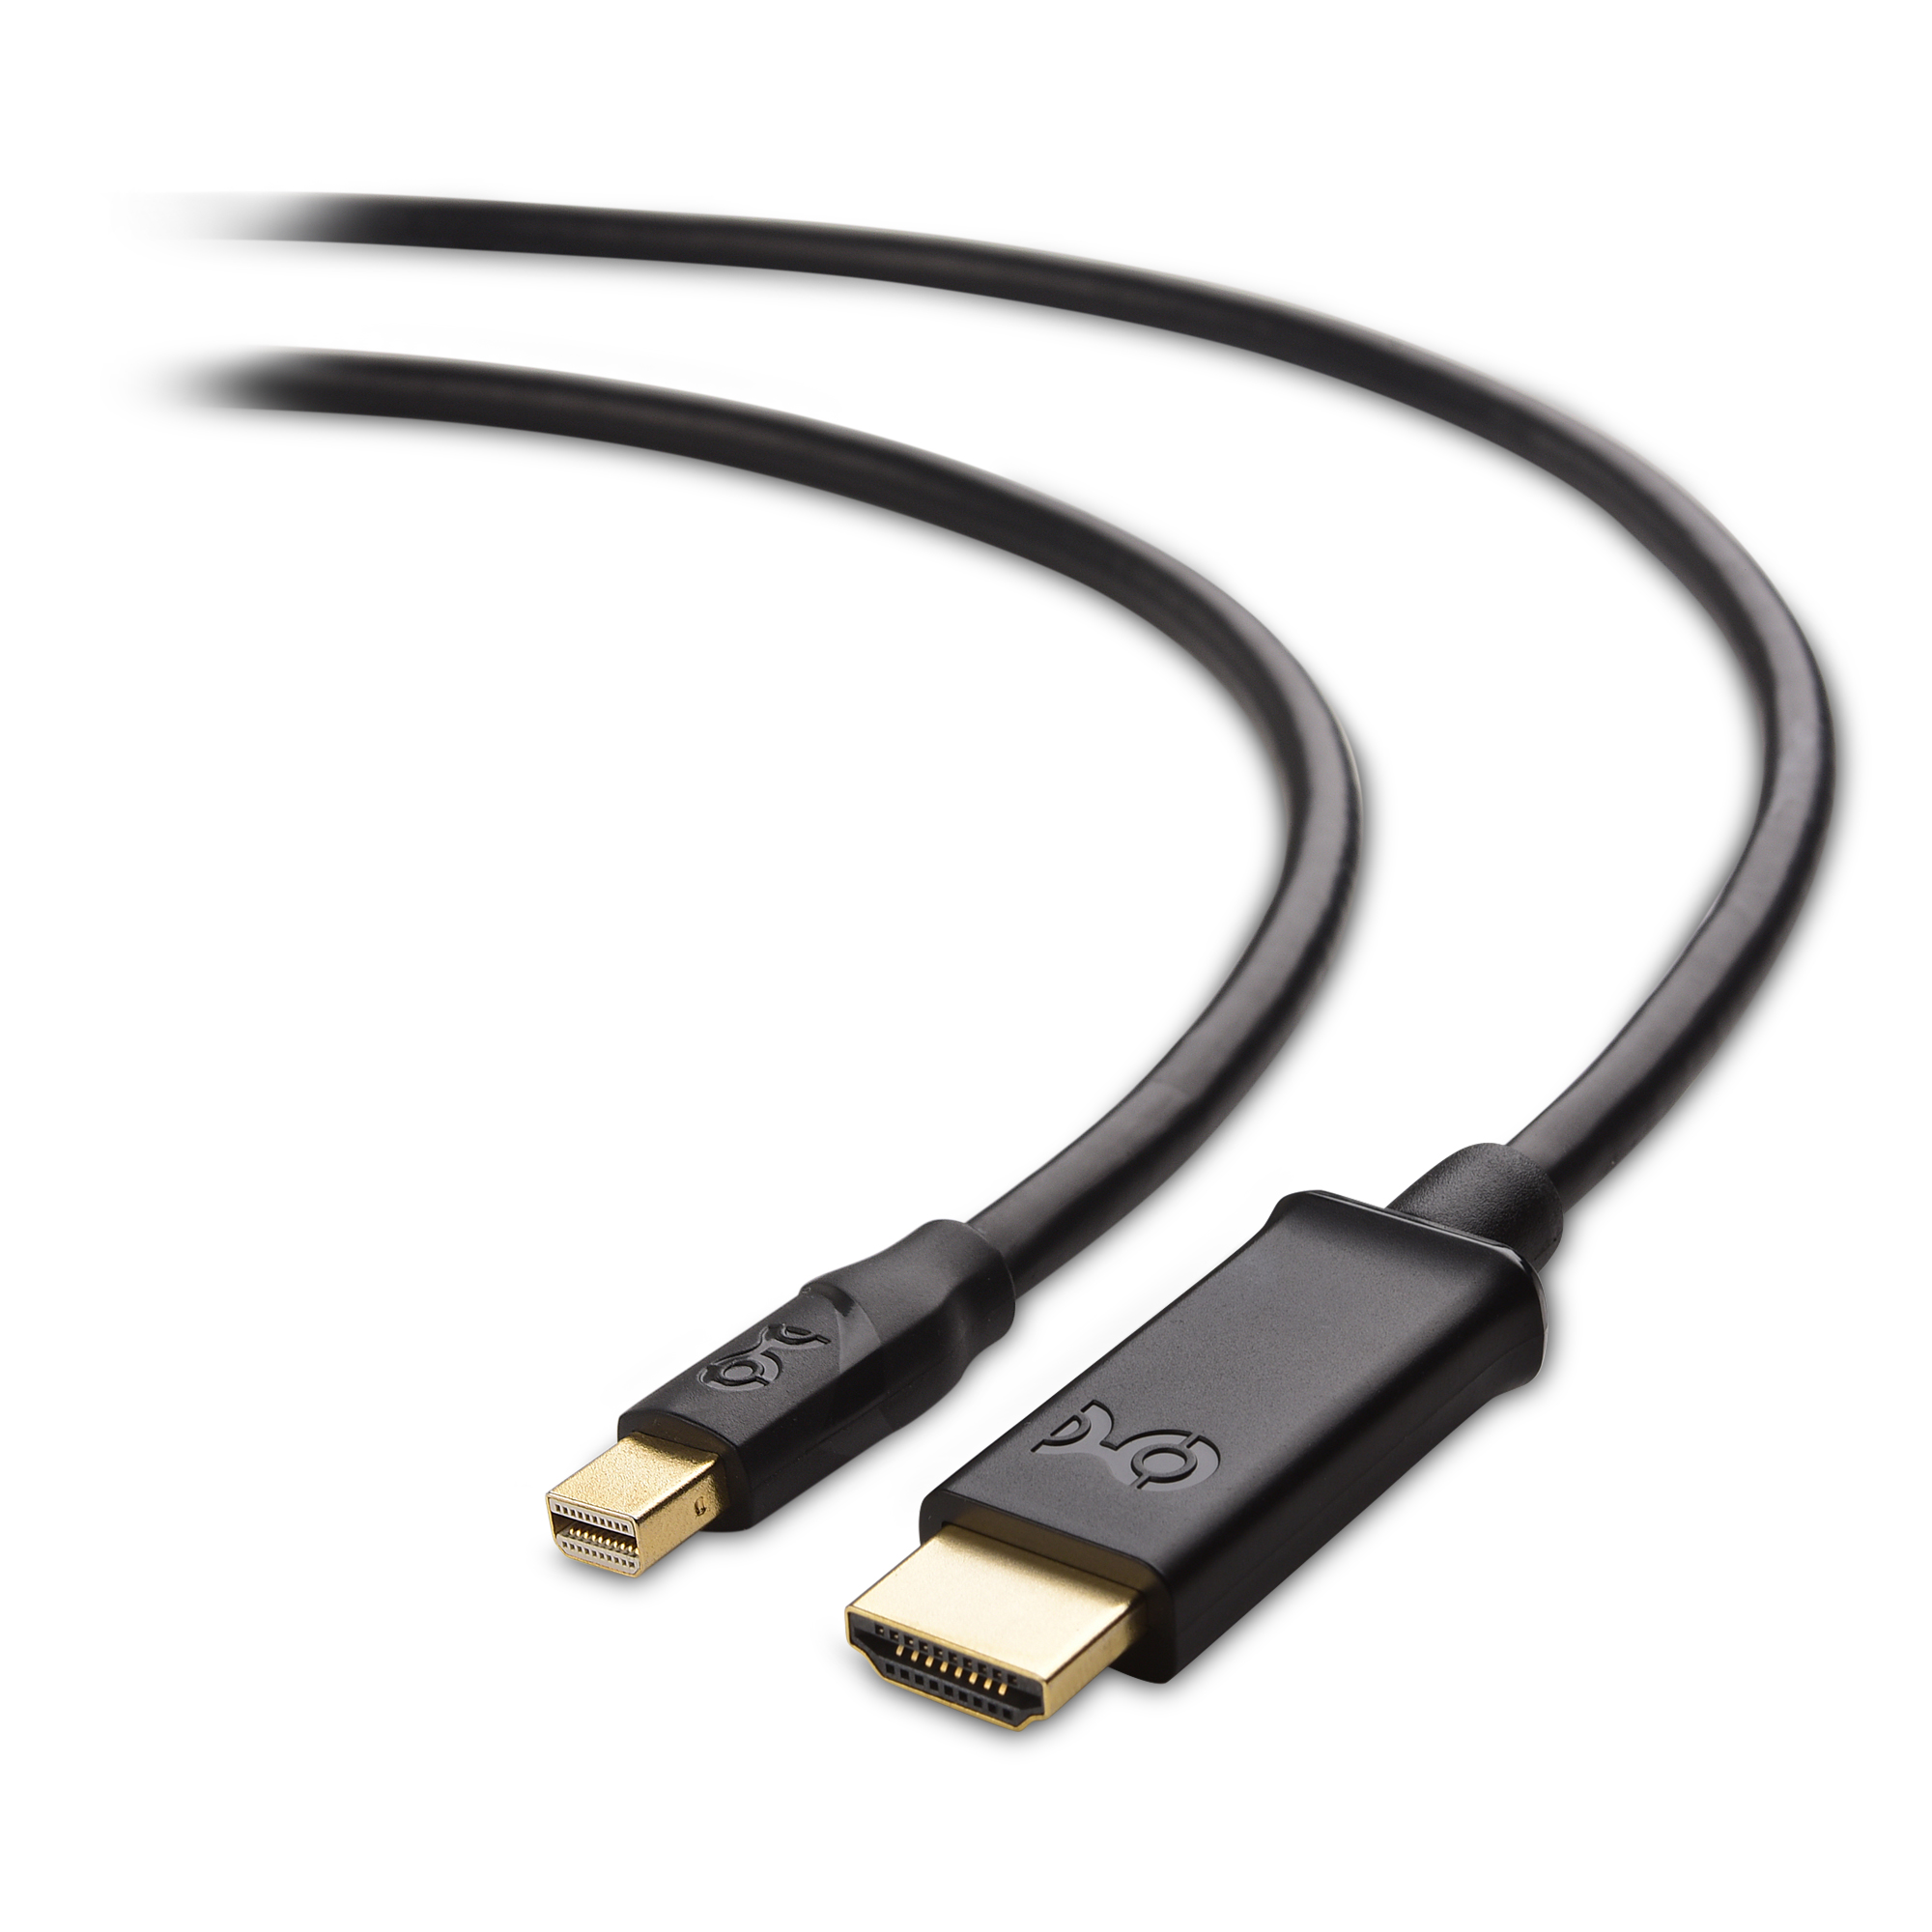 usb to hdmi cable for mac